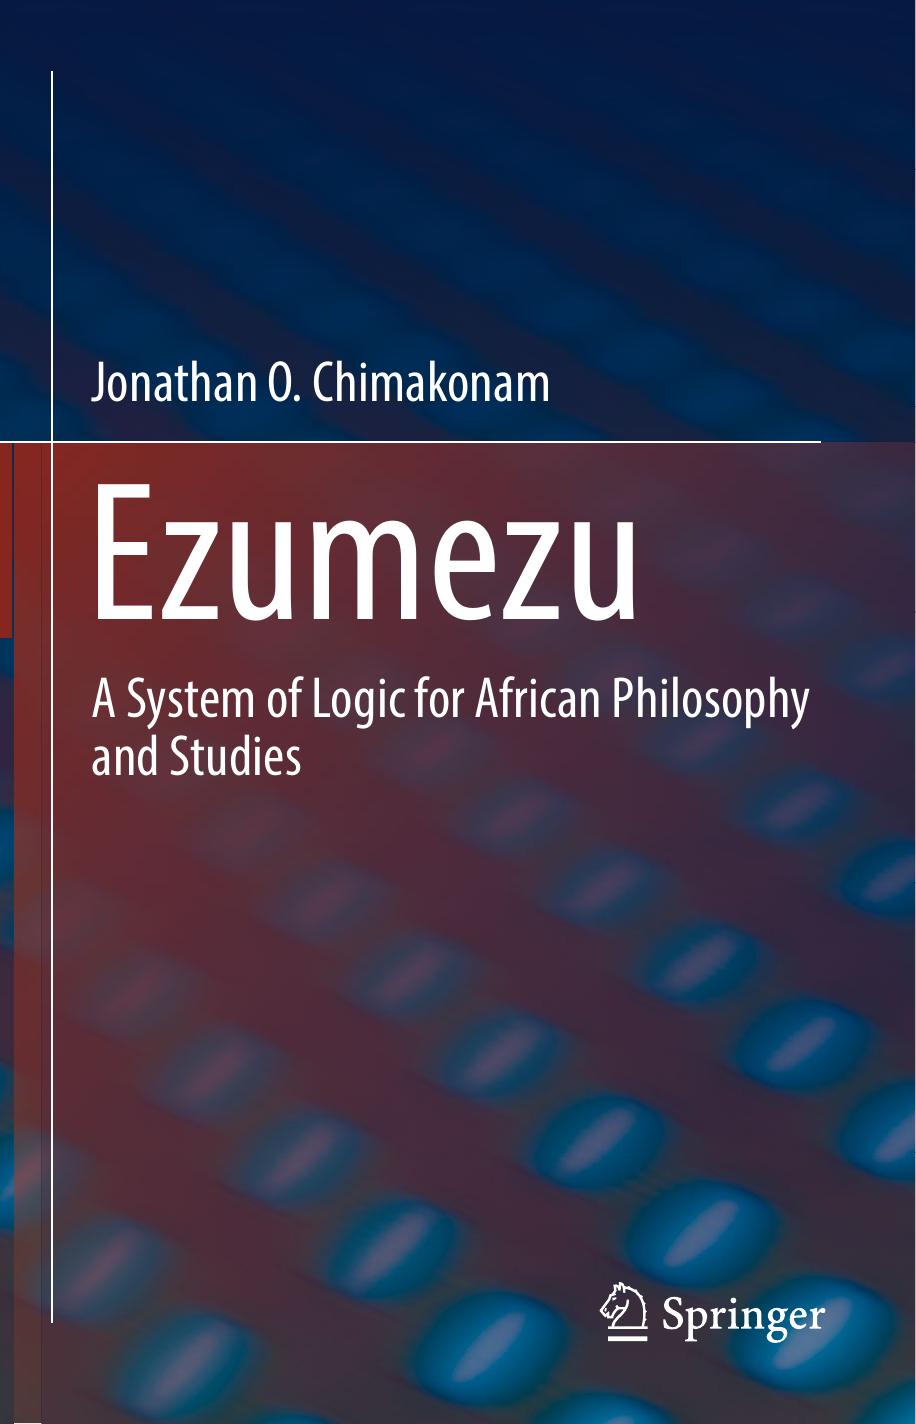 Ezumezu: A System of Logic for African Philosophy and Studies